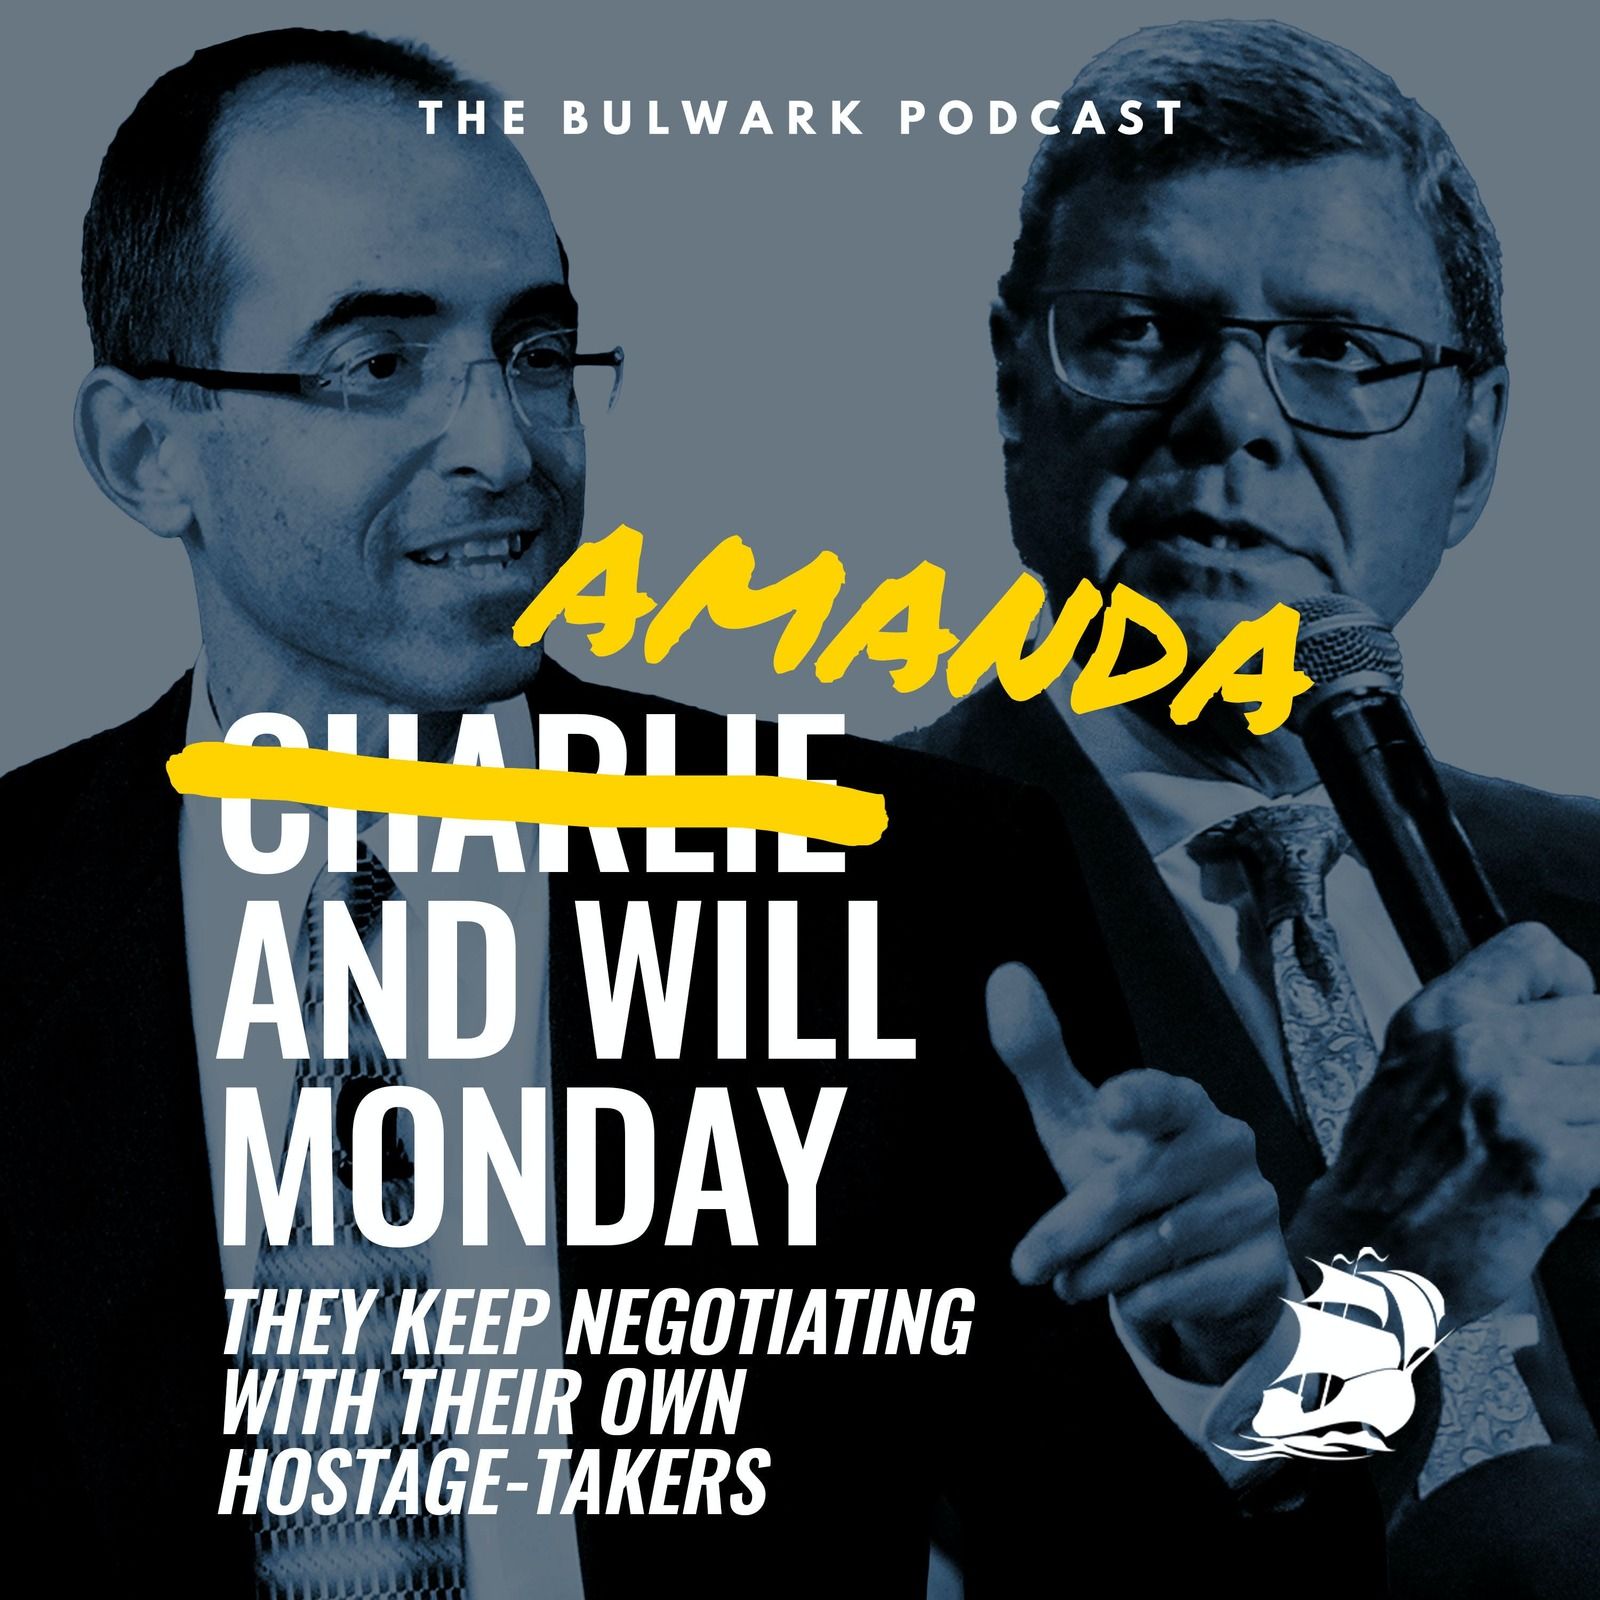 Will Saletan: They Keep Negotiating with Their Own Hostage-Takers by The Bulwark Podcast